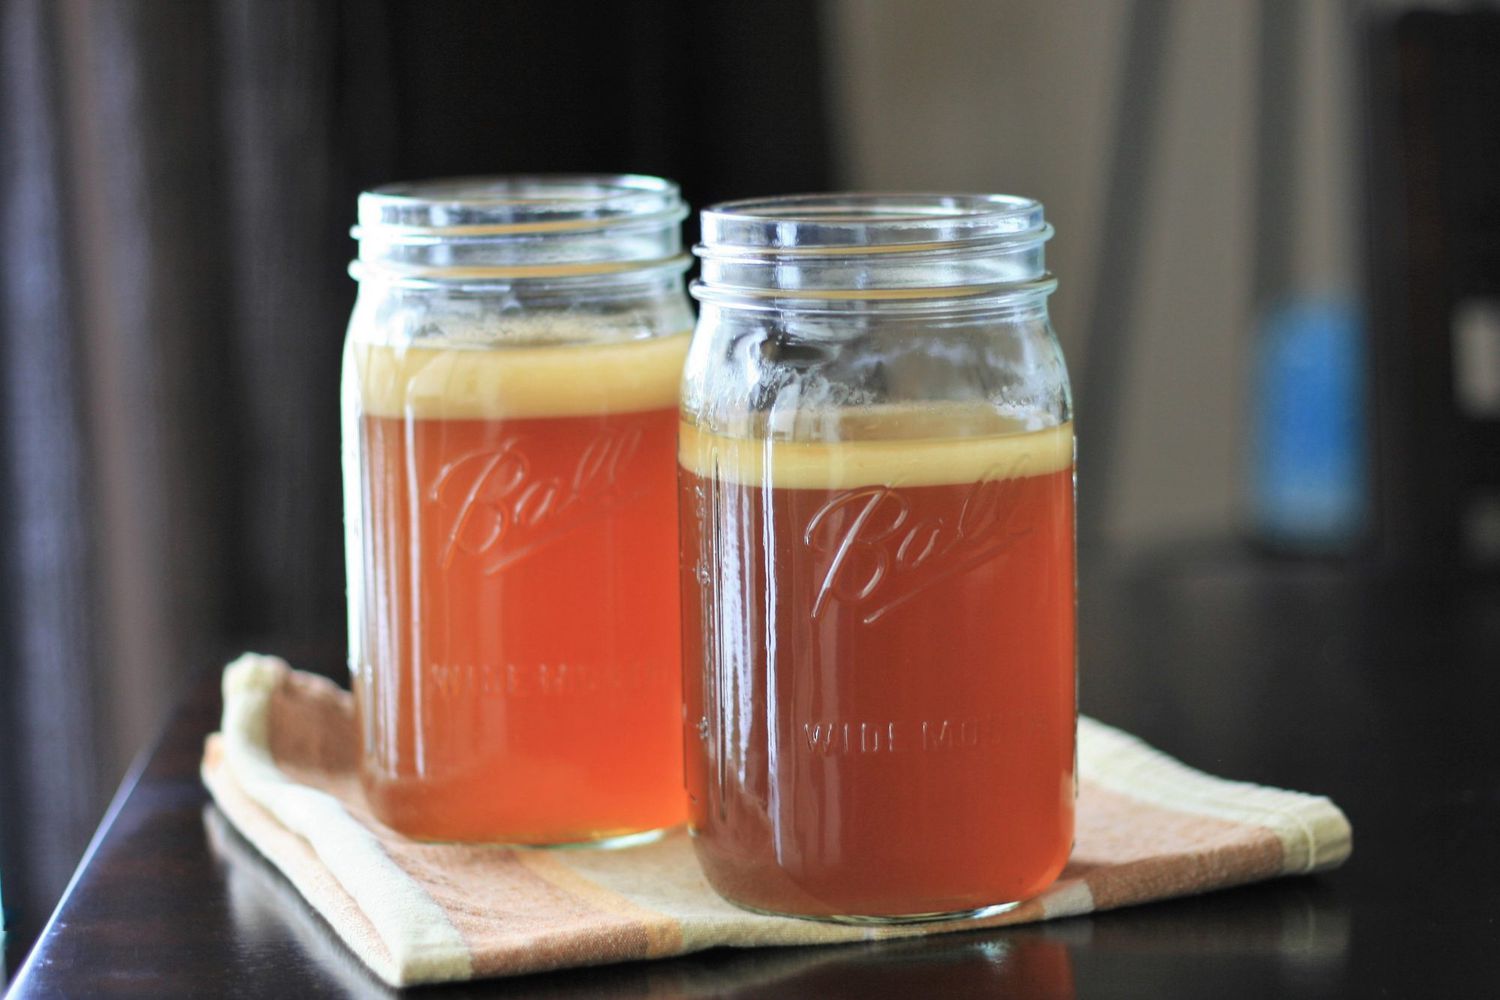 Two mason jars of clear amber-colored stock